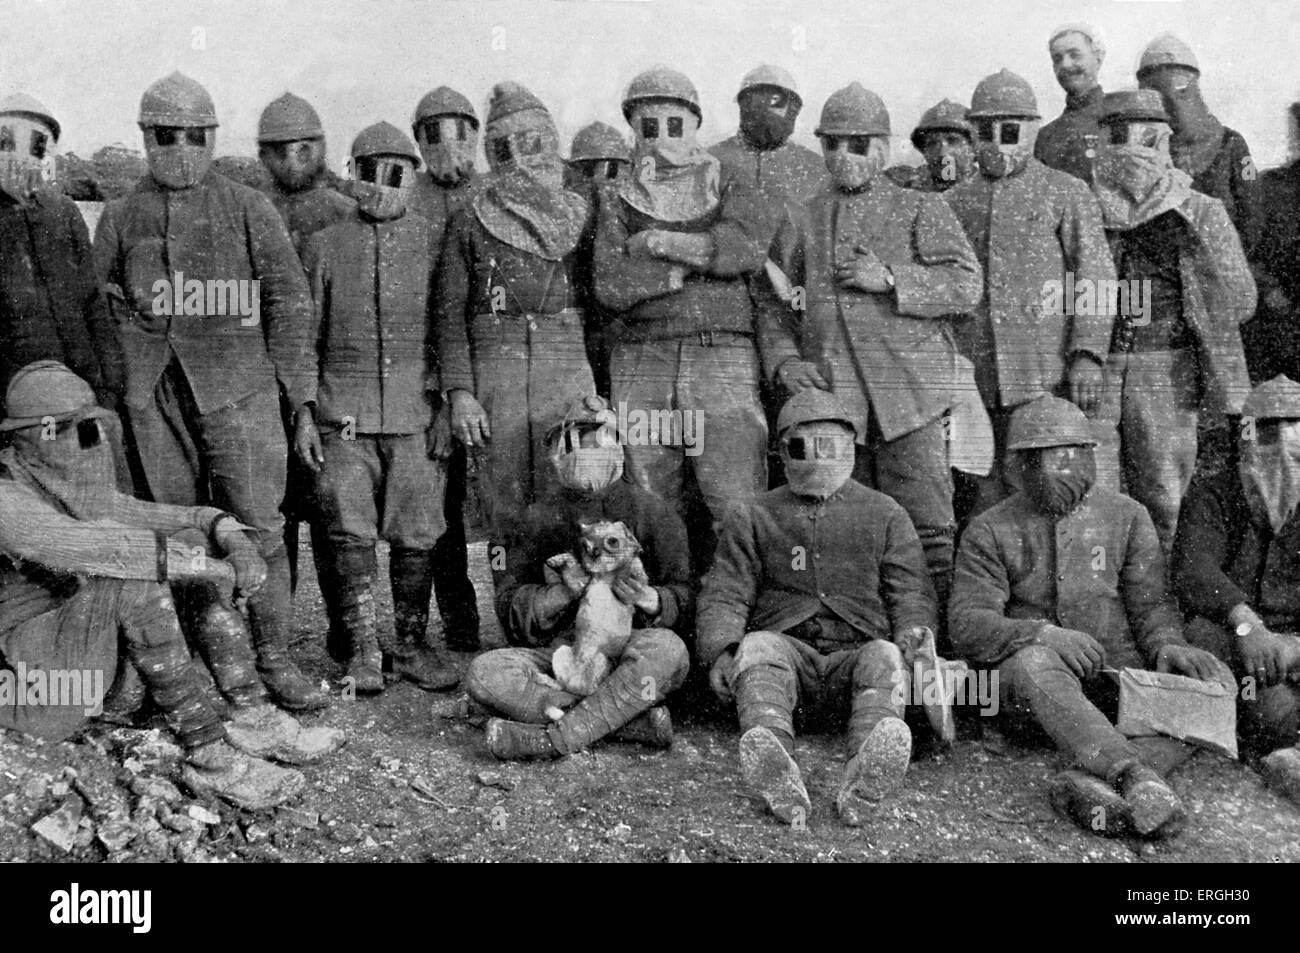 French soldiers with dog wearing gas masks during gas mask parade in trench, Western Front, World War 1. 1916. Stock Photo